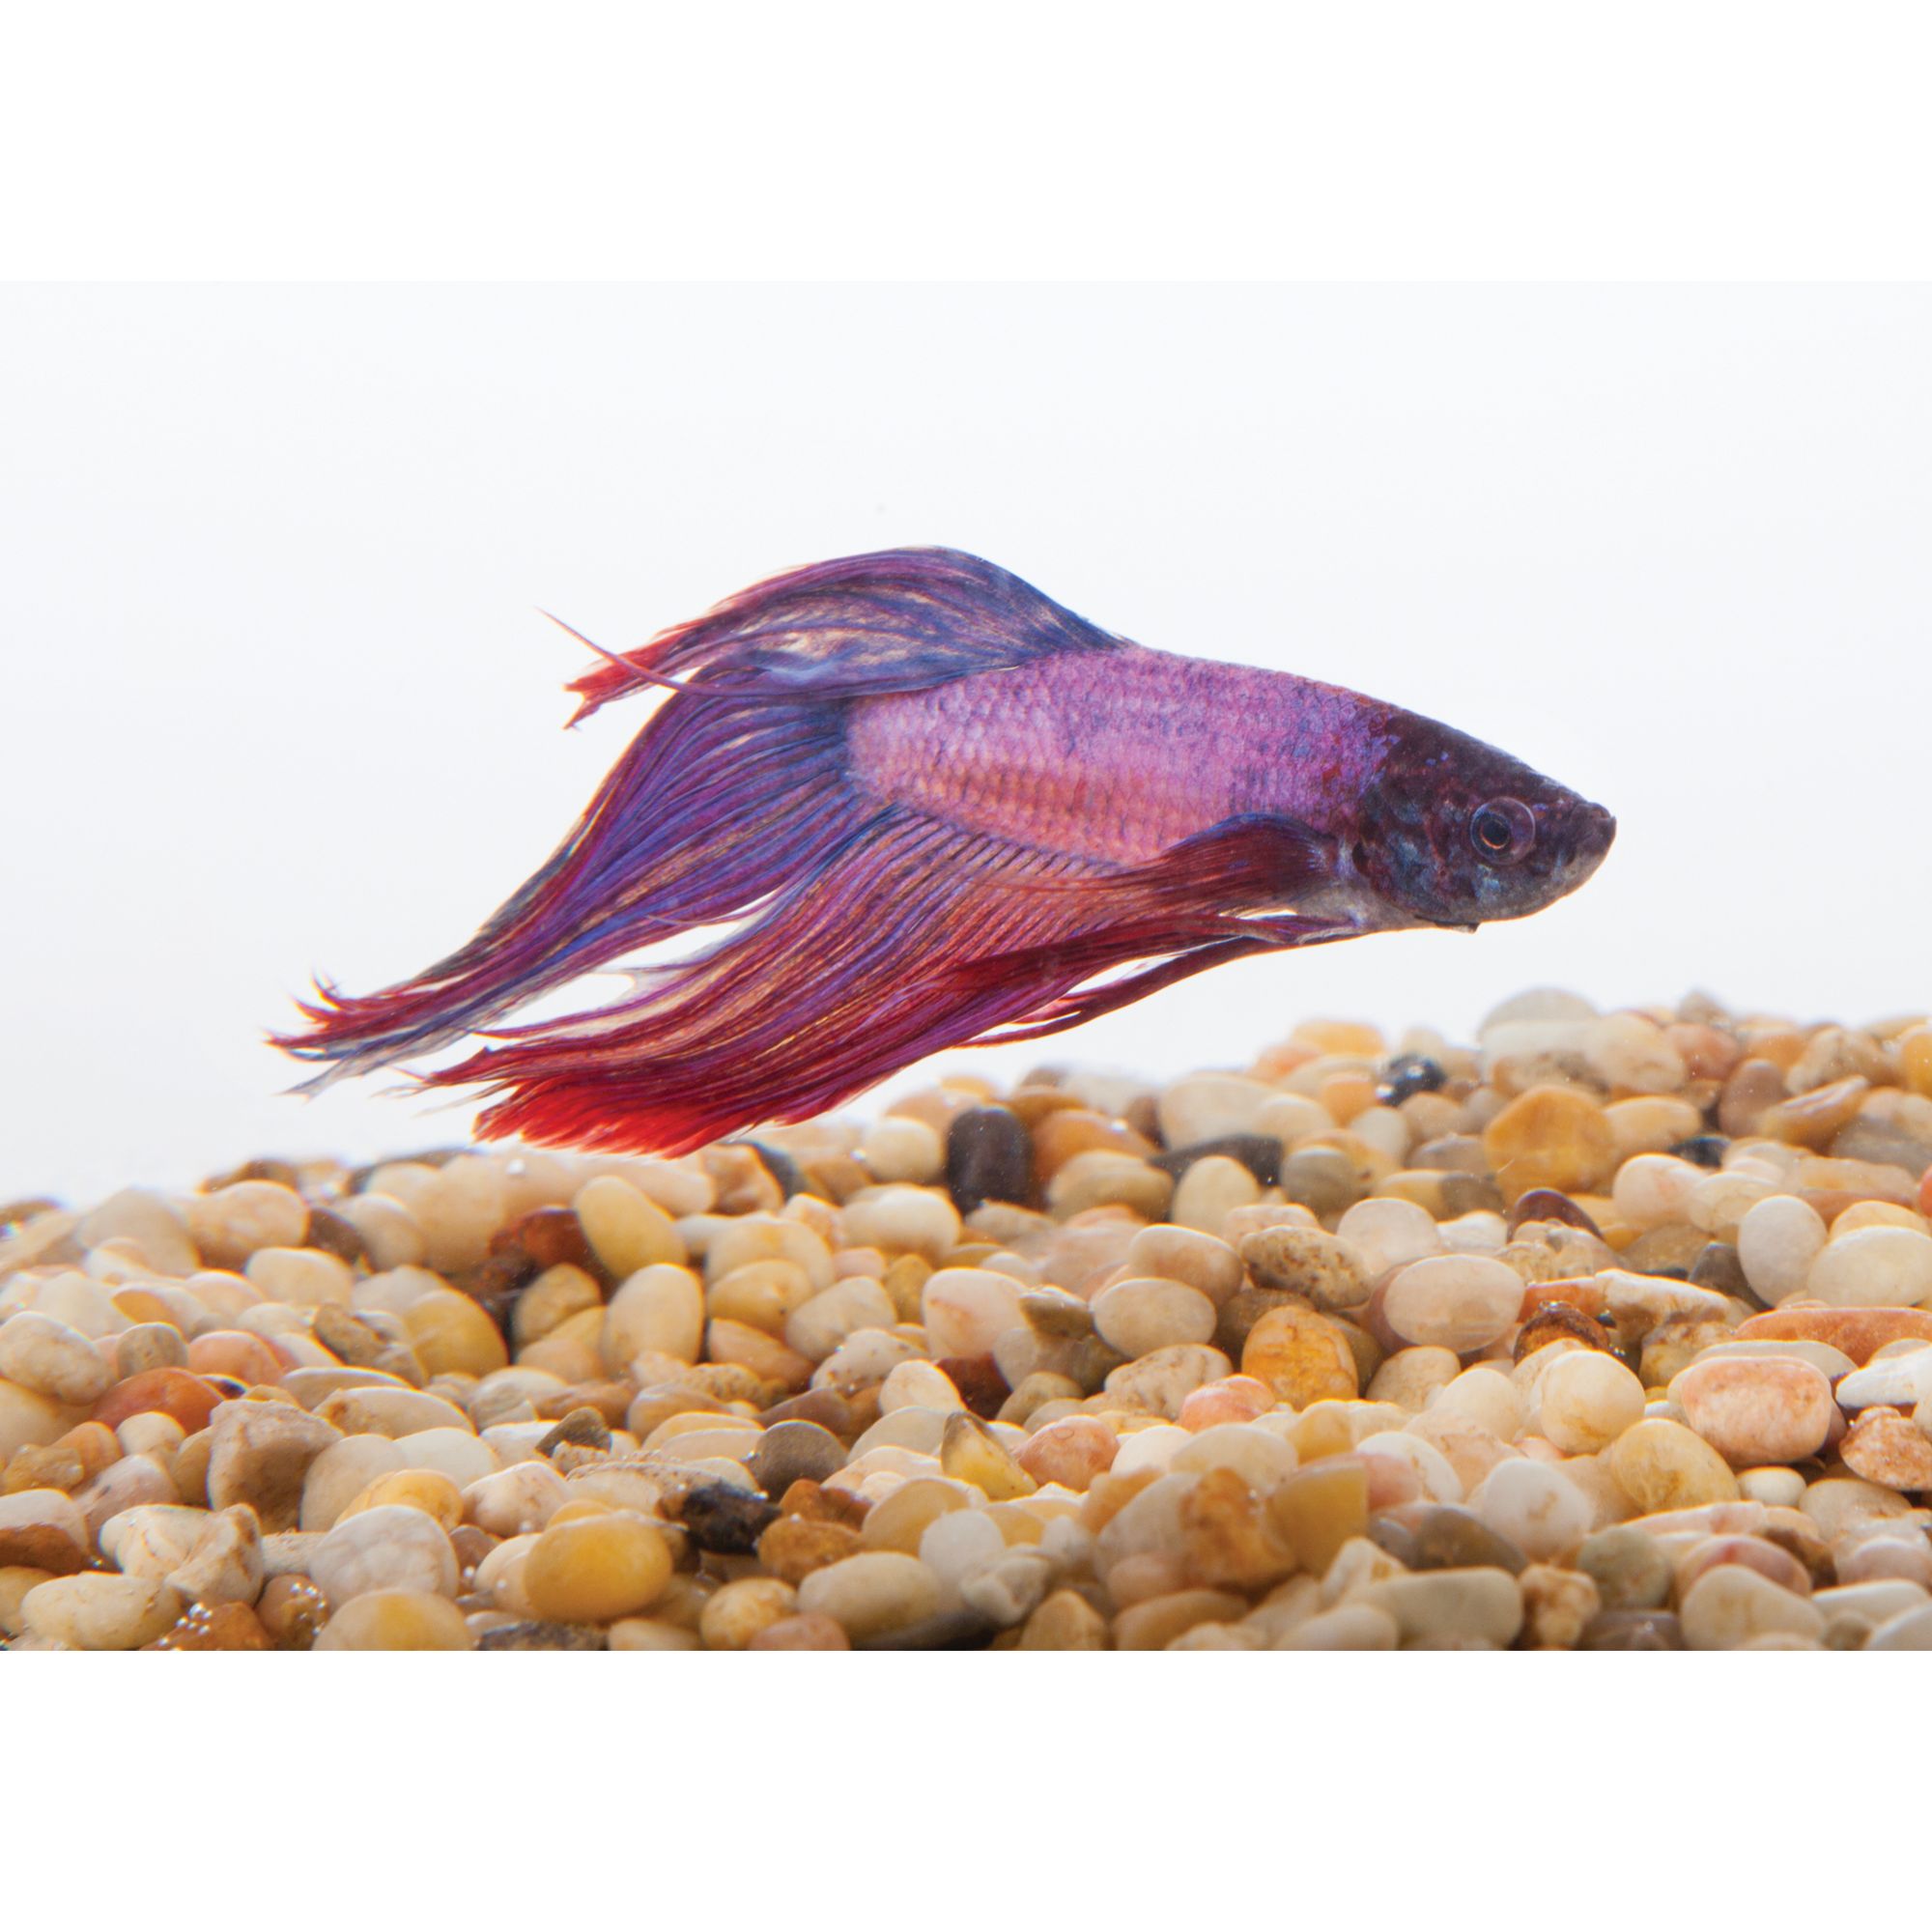 Buy Cheap Petsmart Fish Return Policy Low Prices Free Shipping Online Store Joom